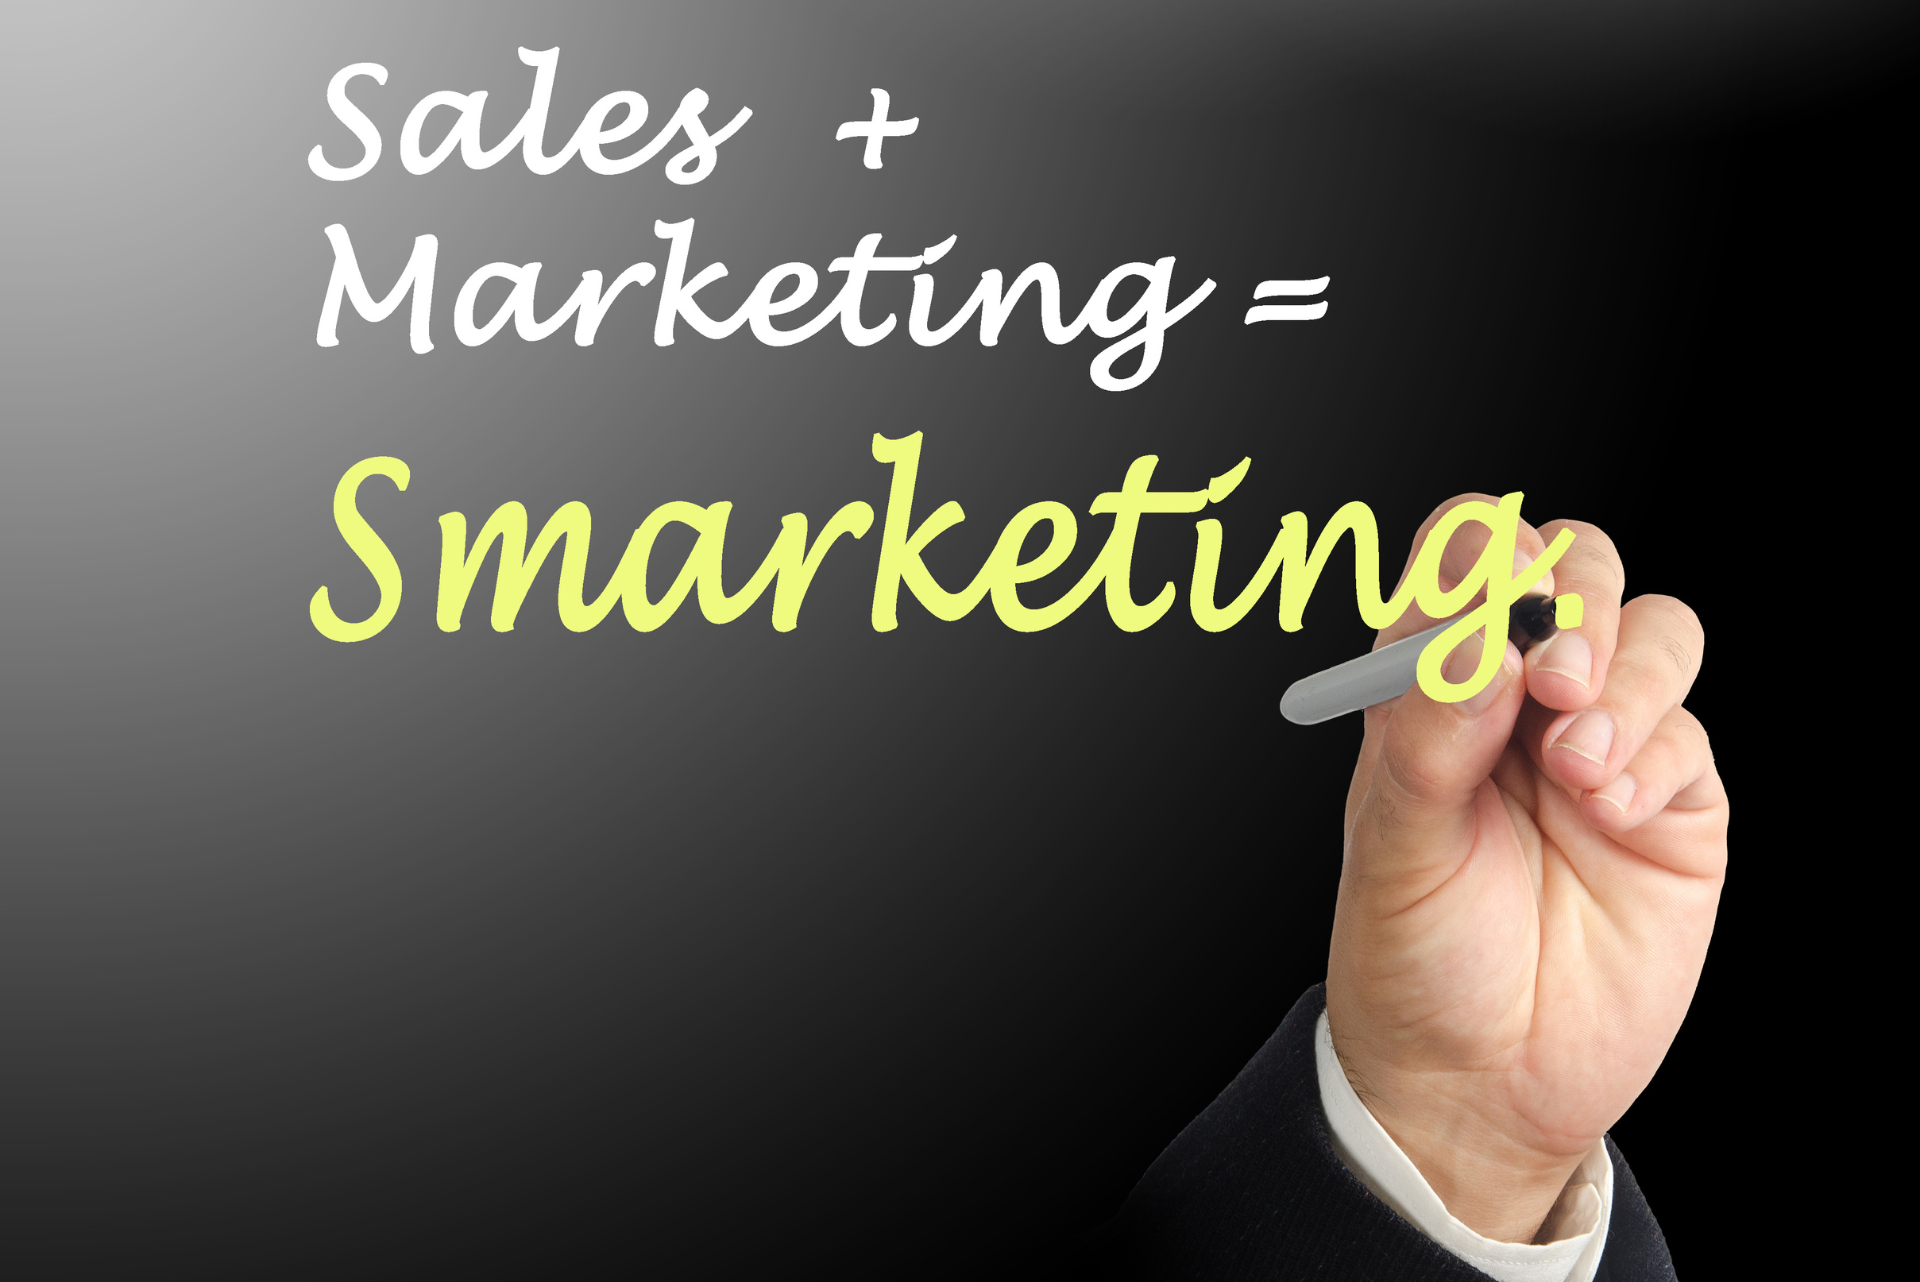 Understand basic marketing and sales practices